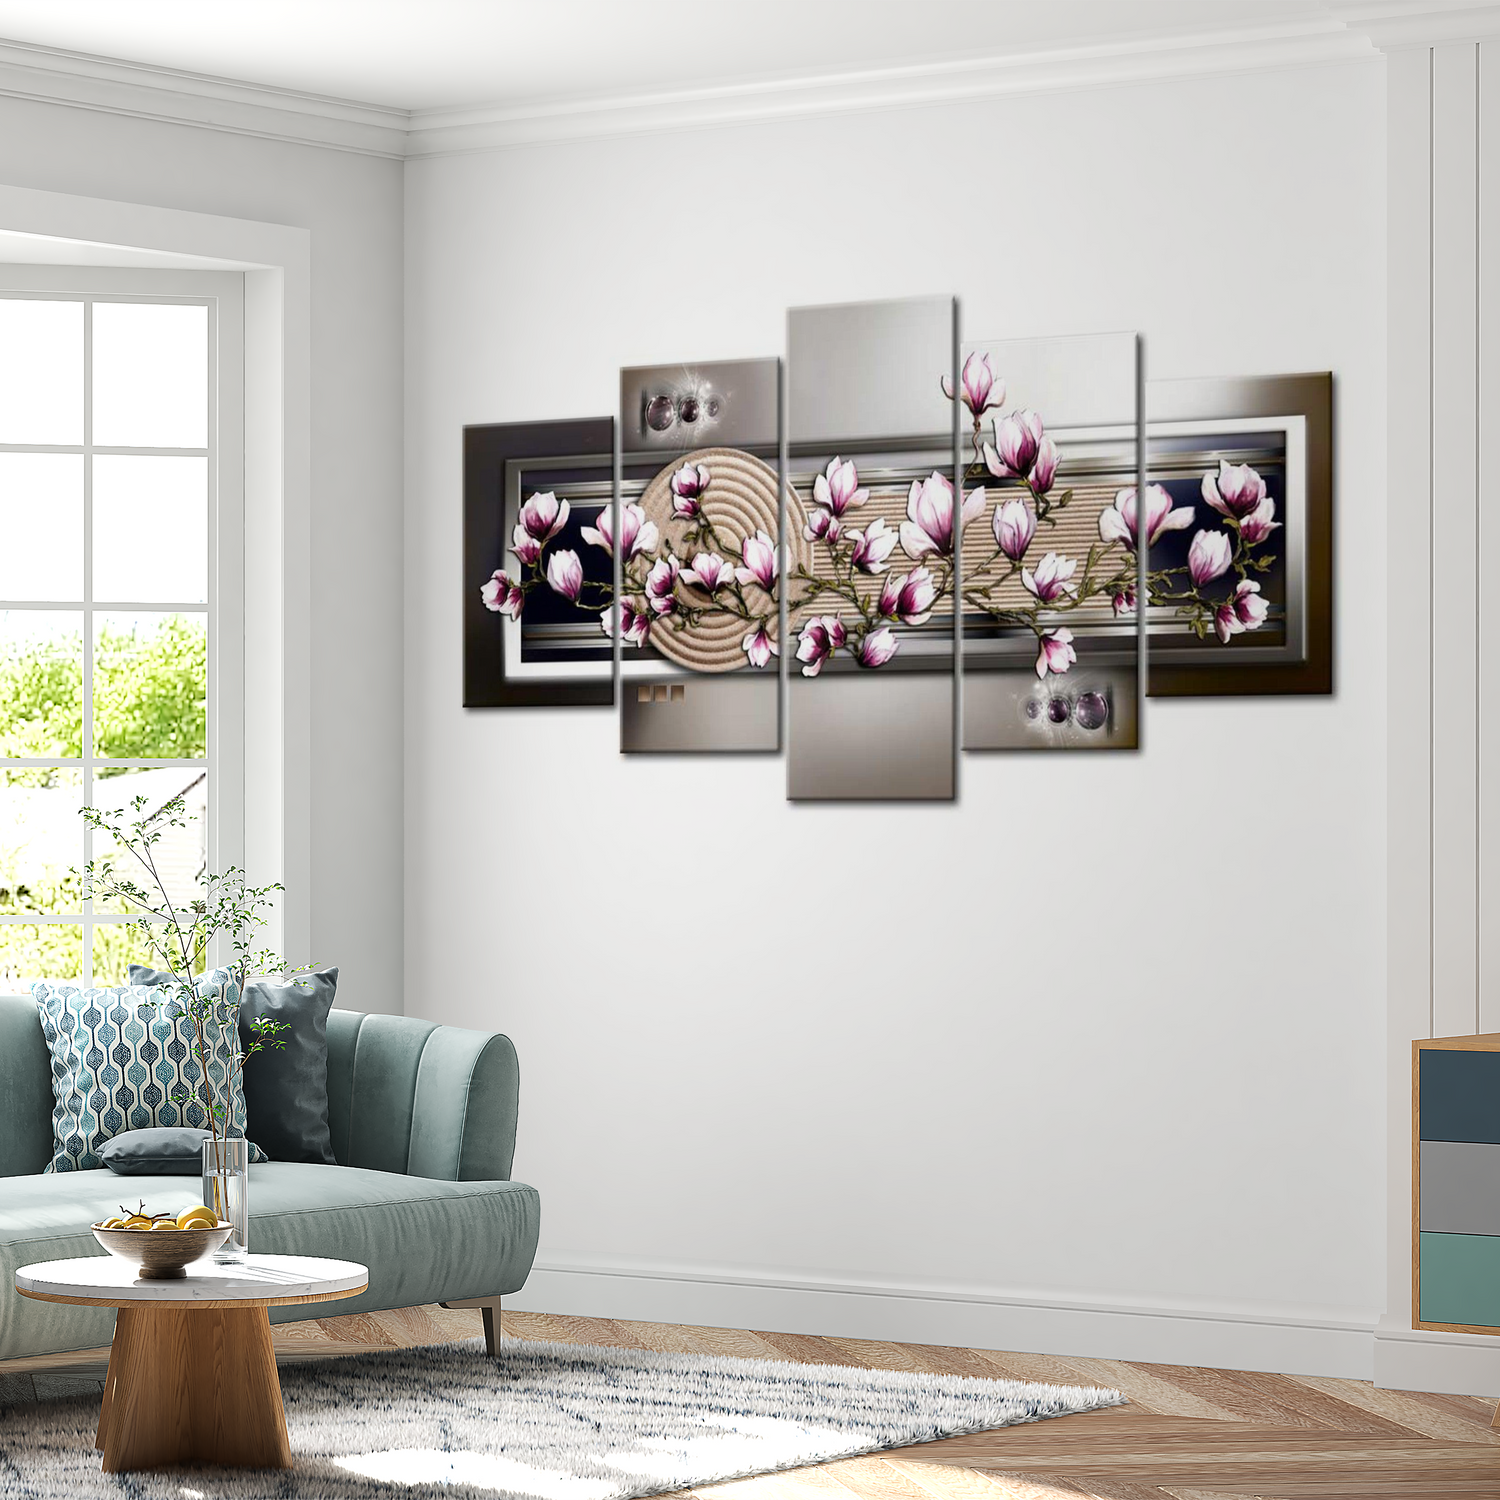 Stretched Canvas Floral Art - Magnolia And Zen Garden 40"Wx20"H